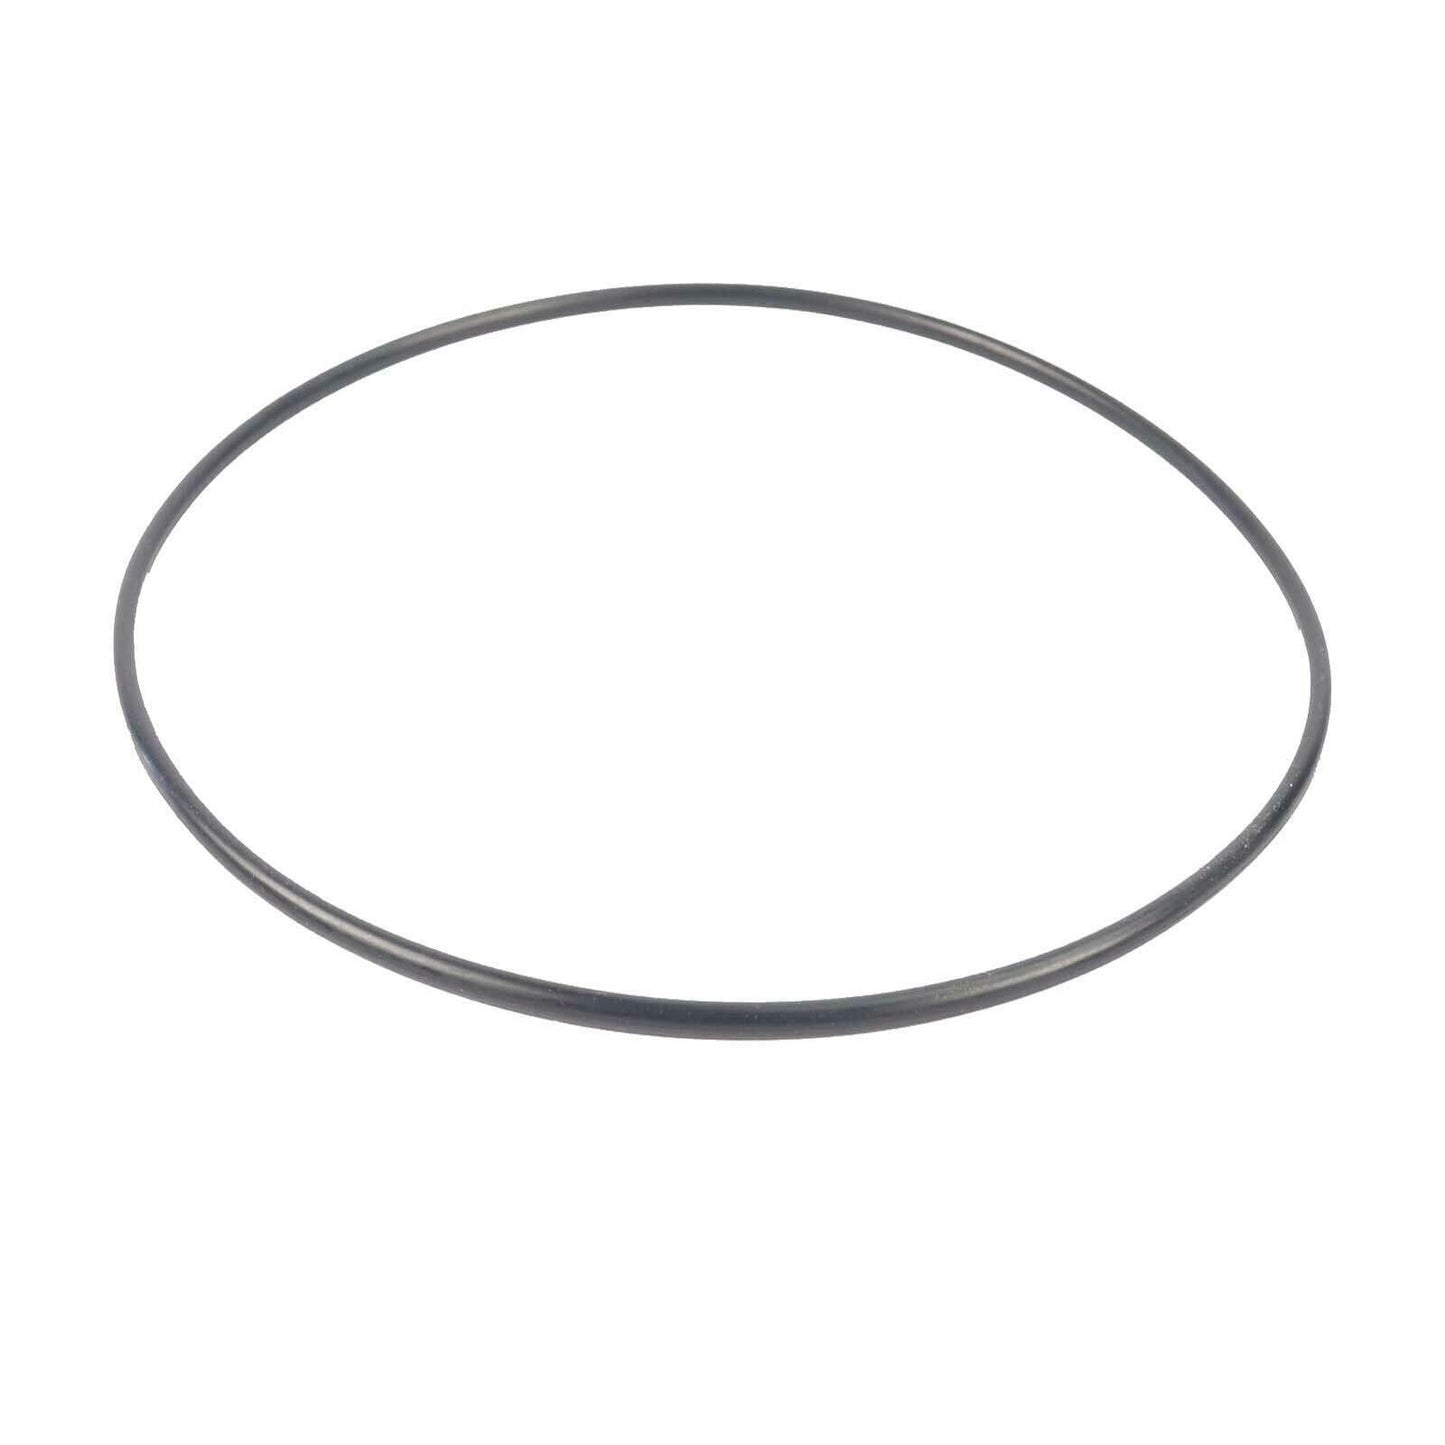 Tank Cartridge Filter Oring Lid O-ring Pool For Astral Hurlcon ZX Series 78105 Sparesbarn